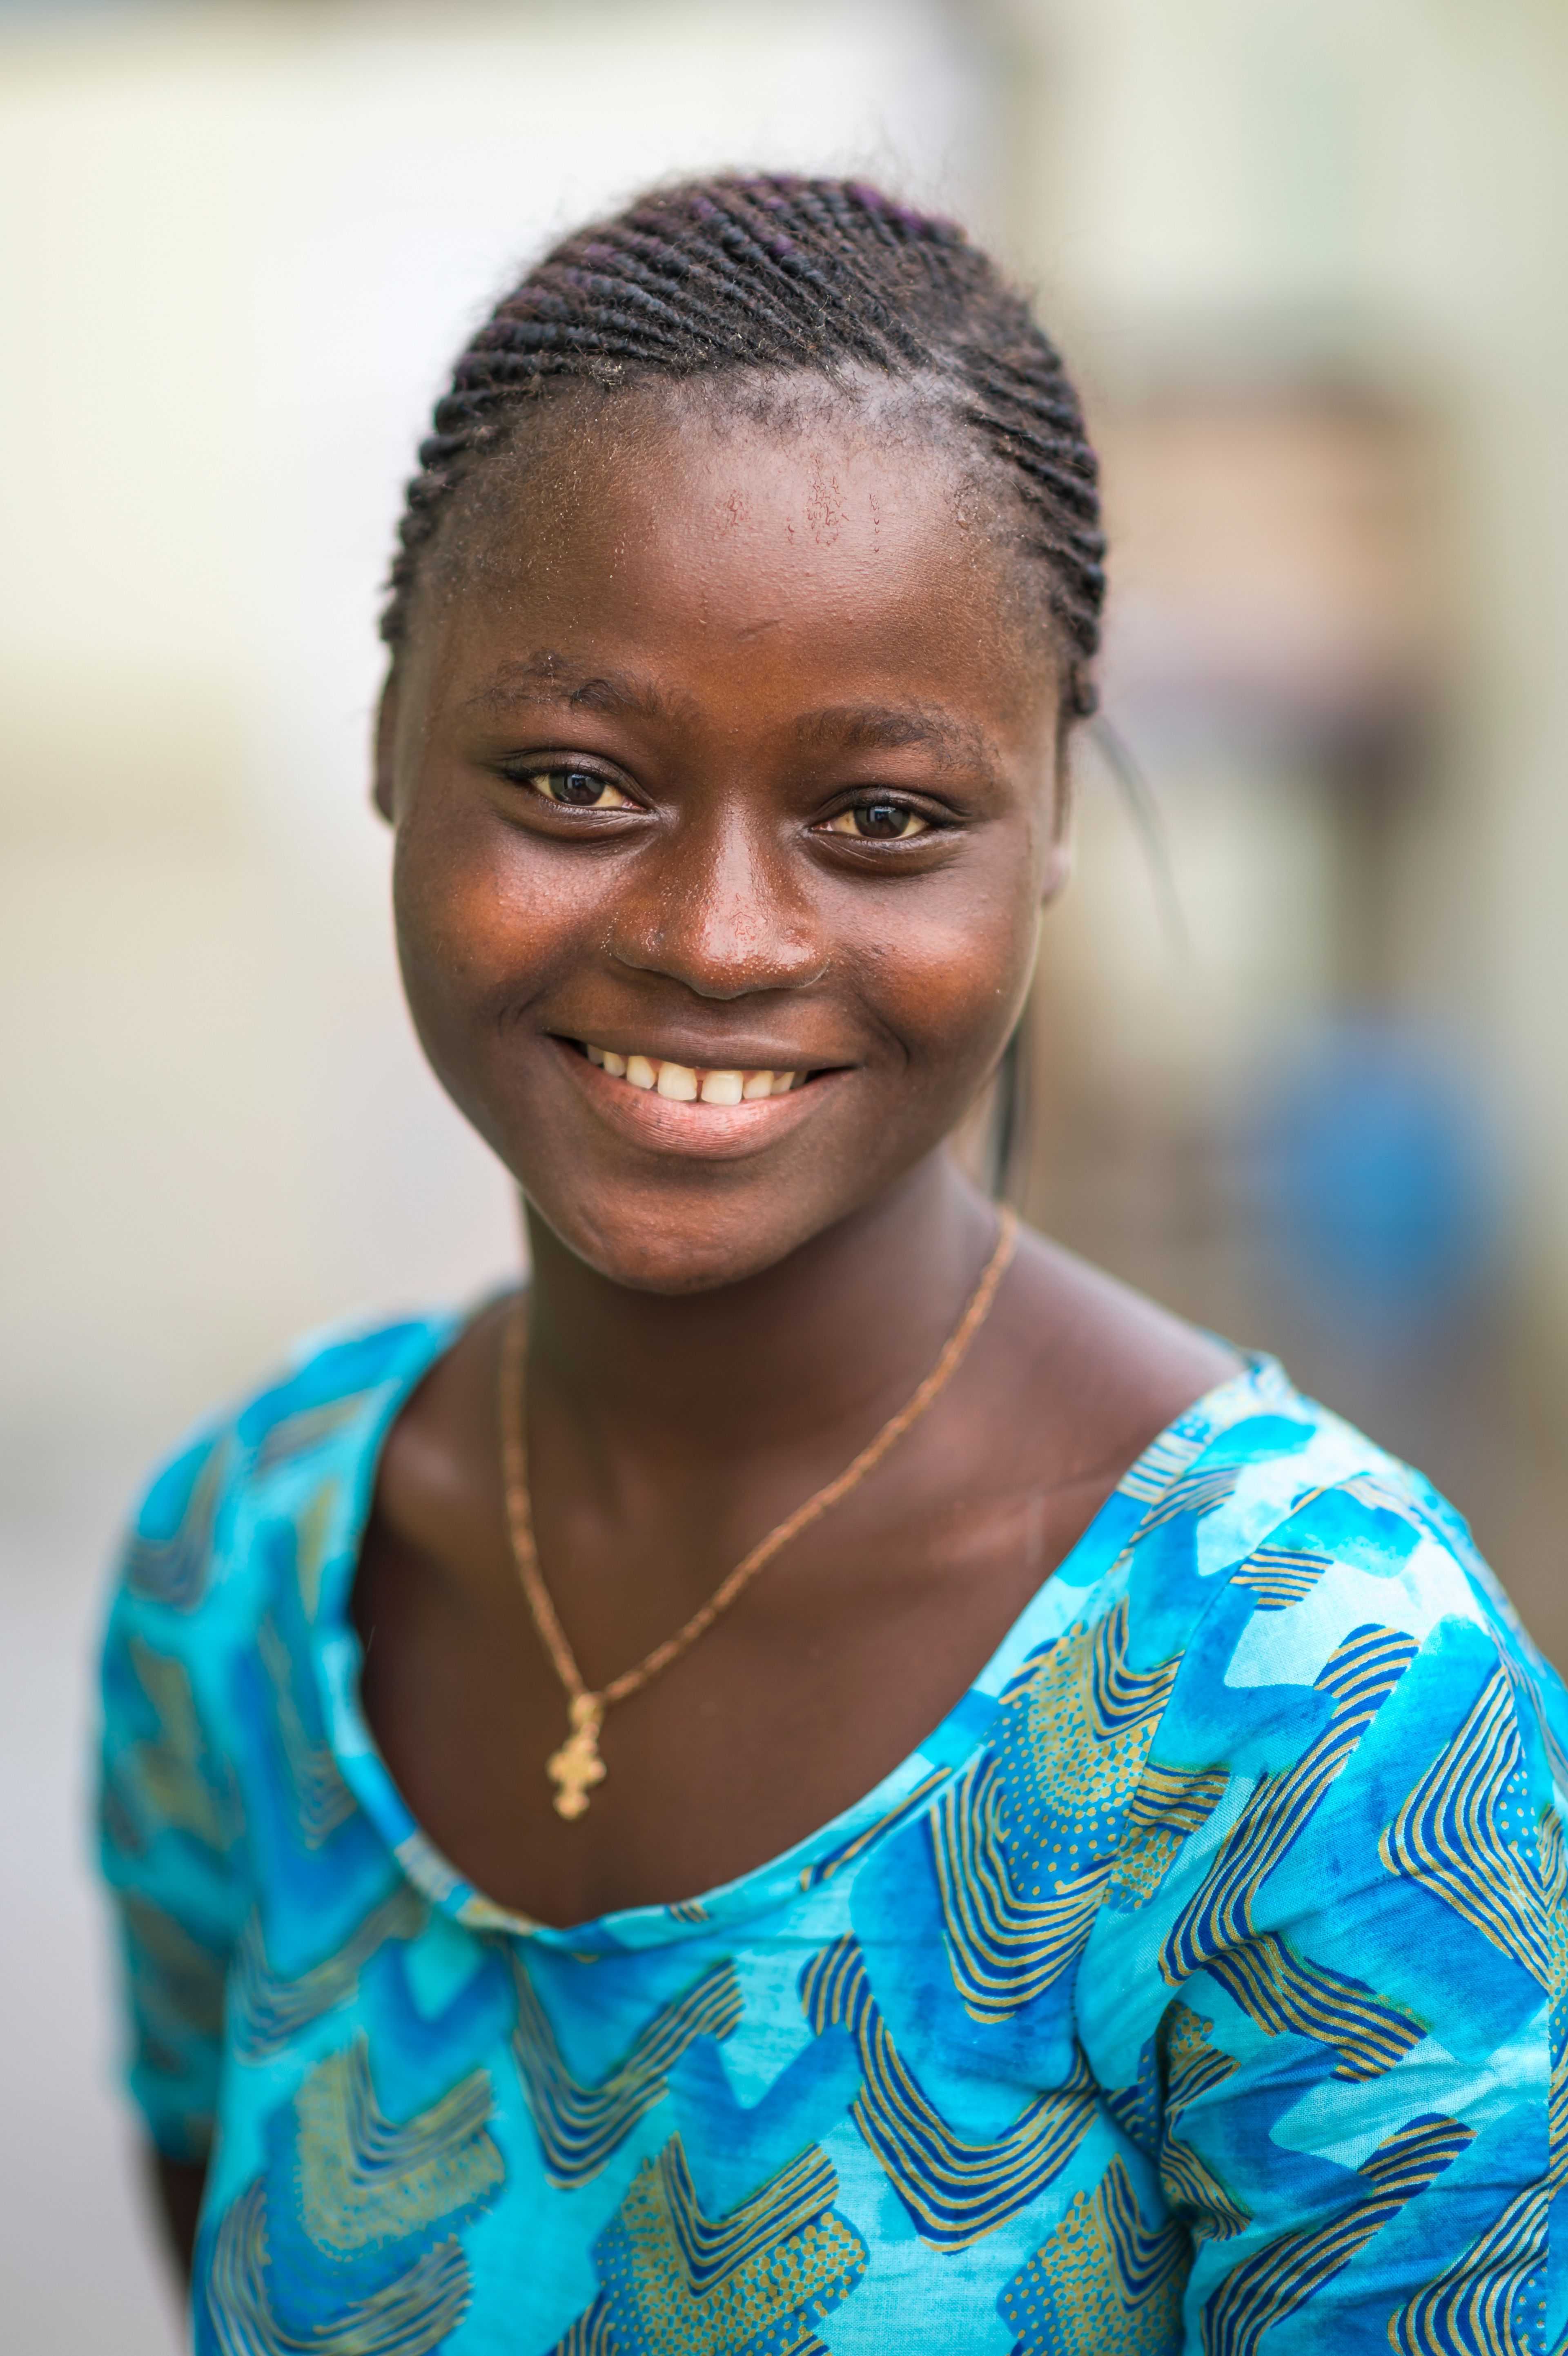 A portrait of a young woman in Ghana, wearing a blue shirt, smiling.